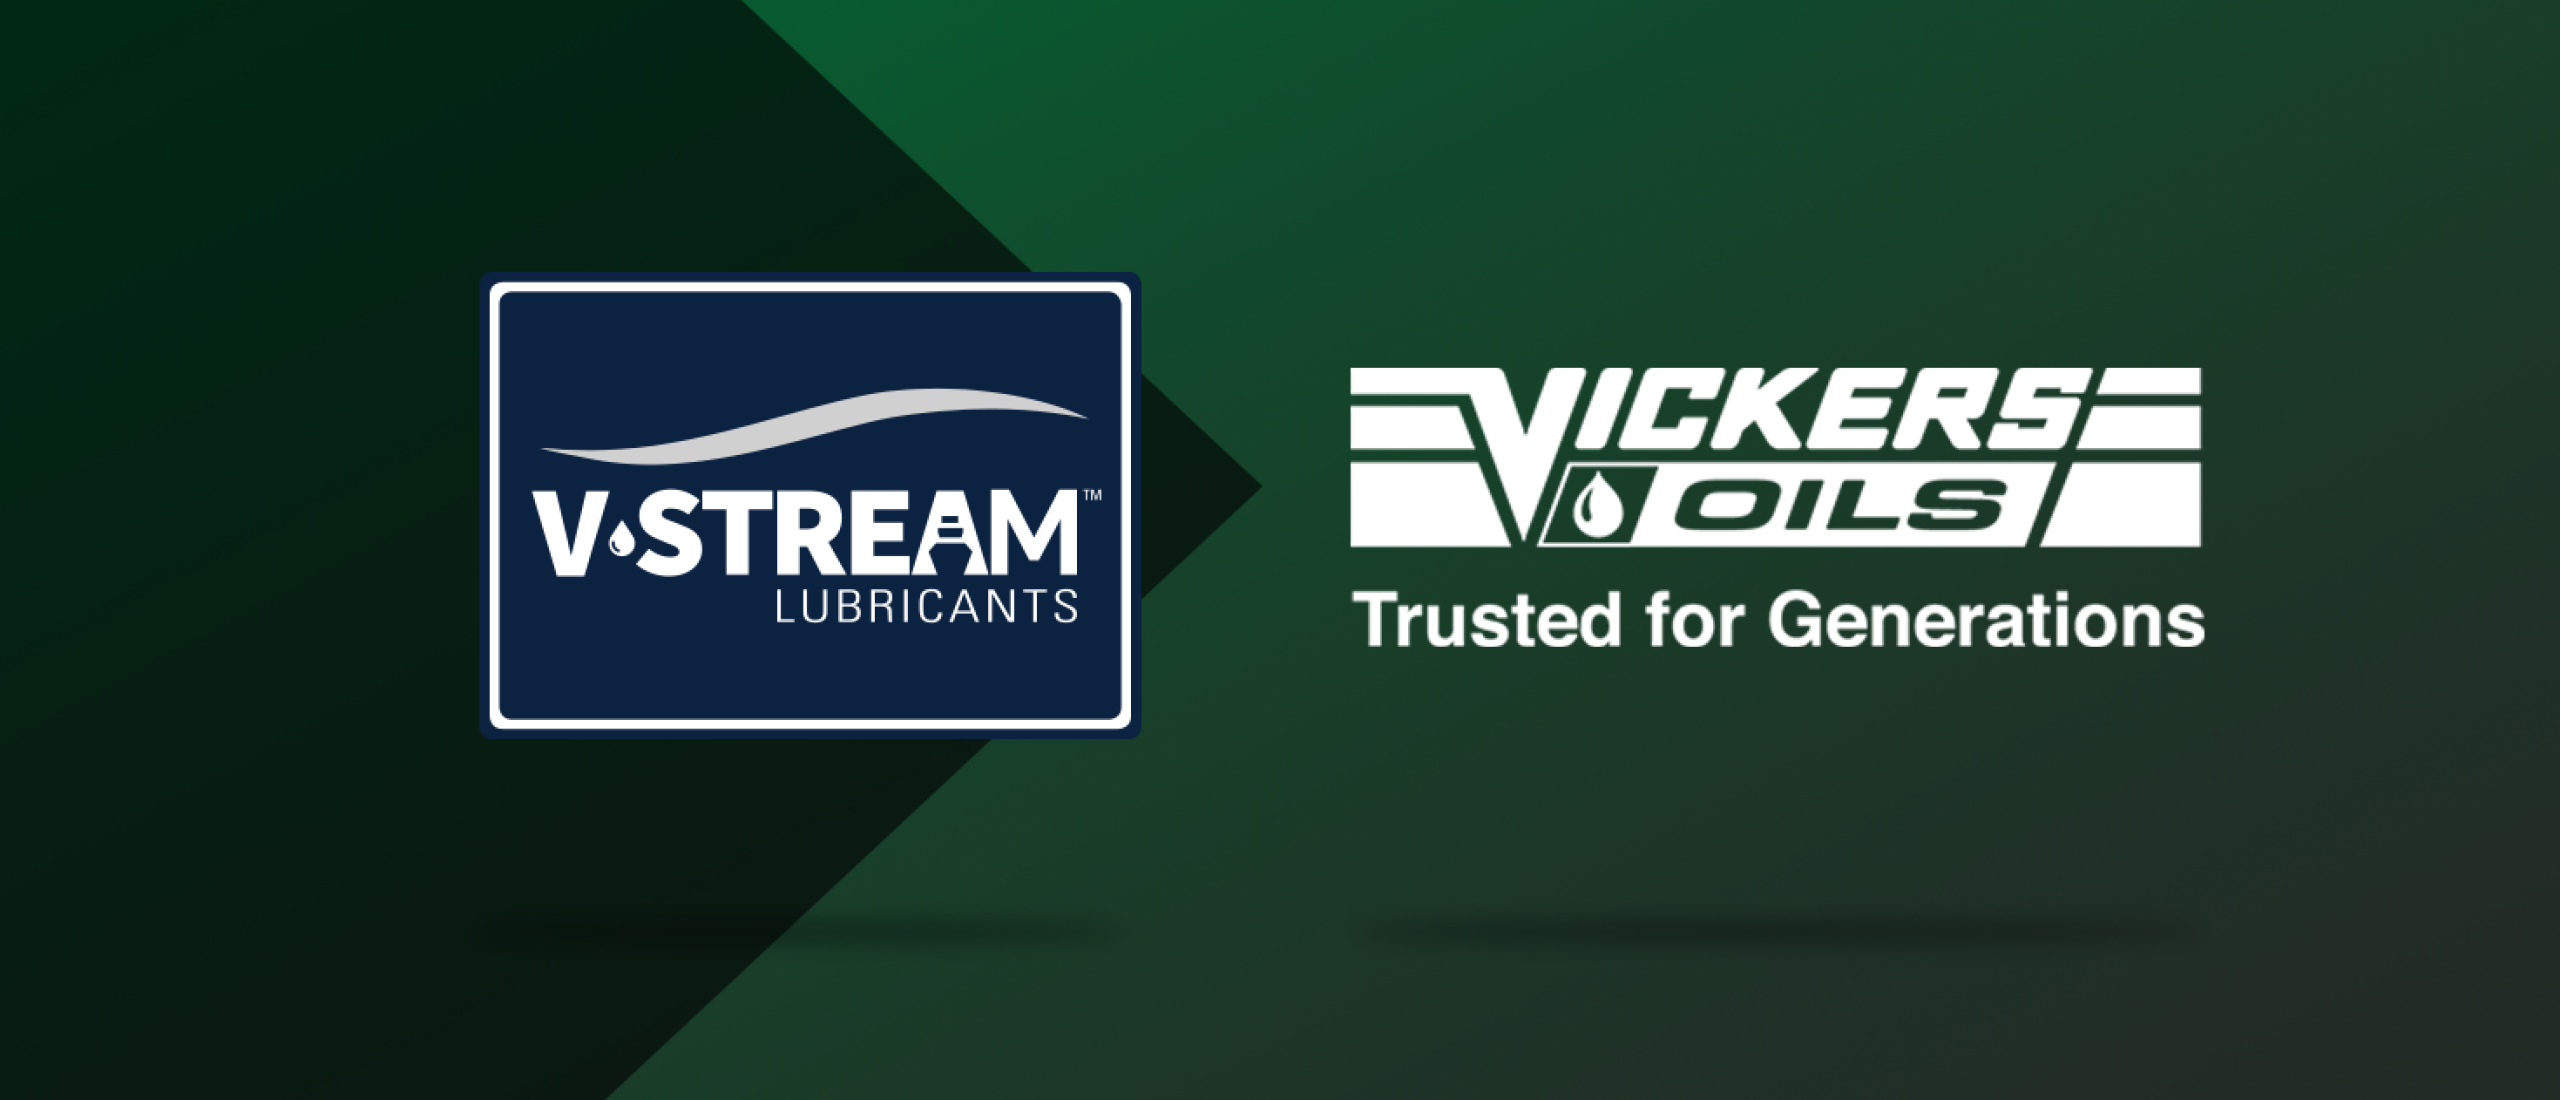 VICKERS OILS HAS CHOSEN V-STREAM LUBRICANTS AS ITS  DISTRIBUTION PARTNER FOR THE MAIN EUROPEAN INLAND WATERWAYS